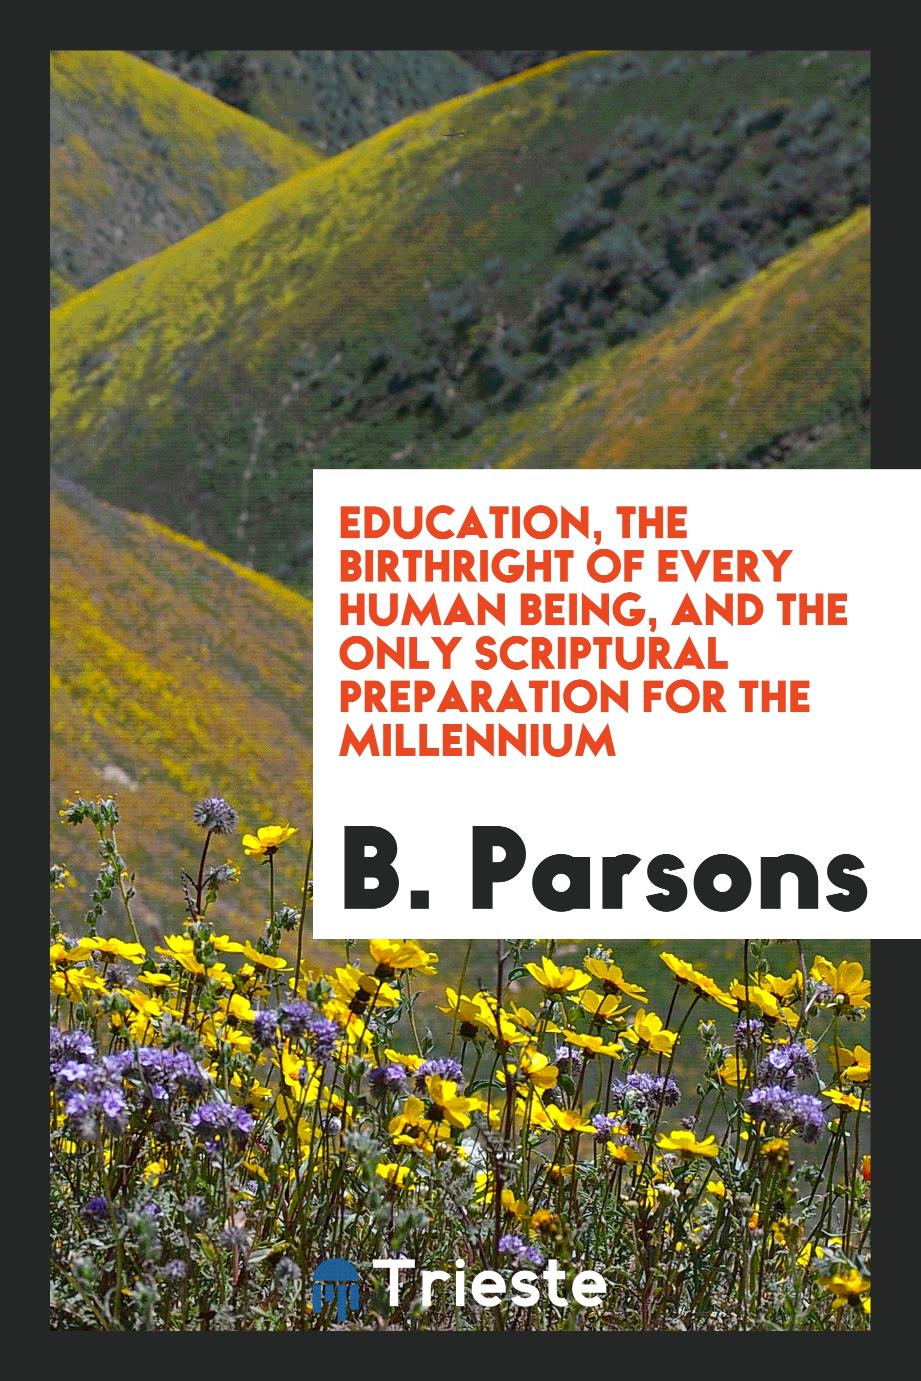 Education, the Birthright of Every Human Being, and the Only Scriptural Preparation for the Millennium